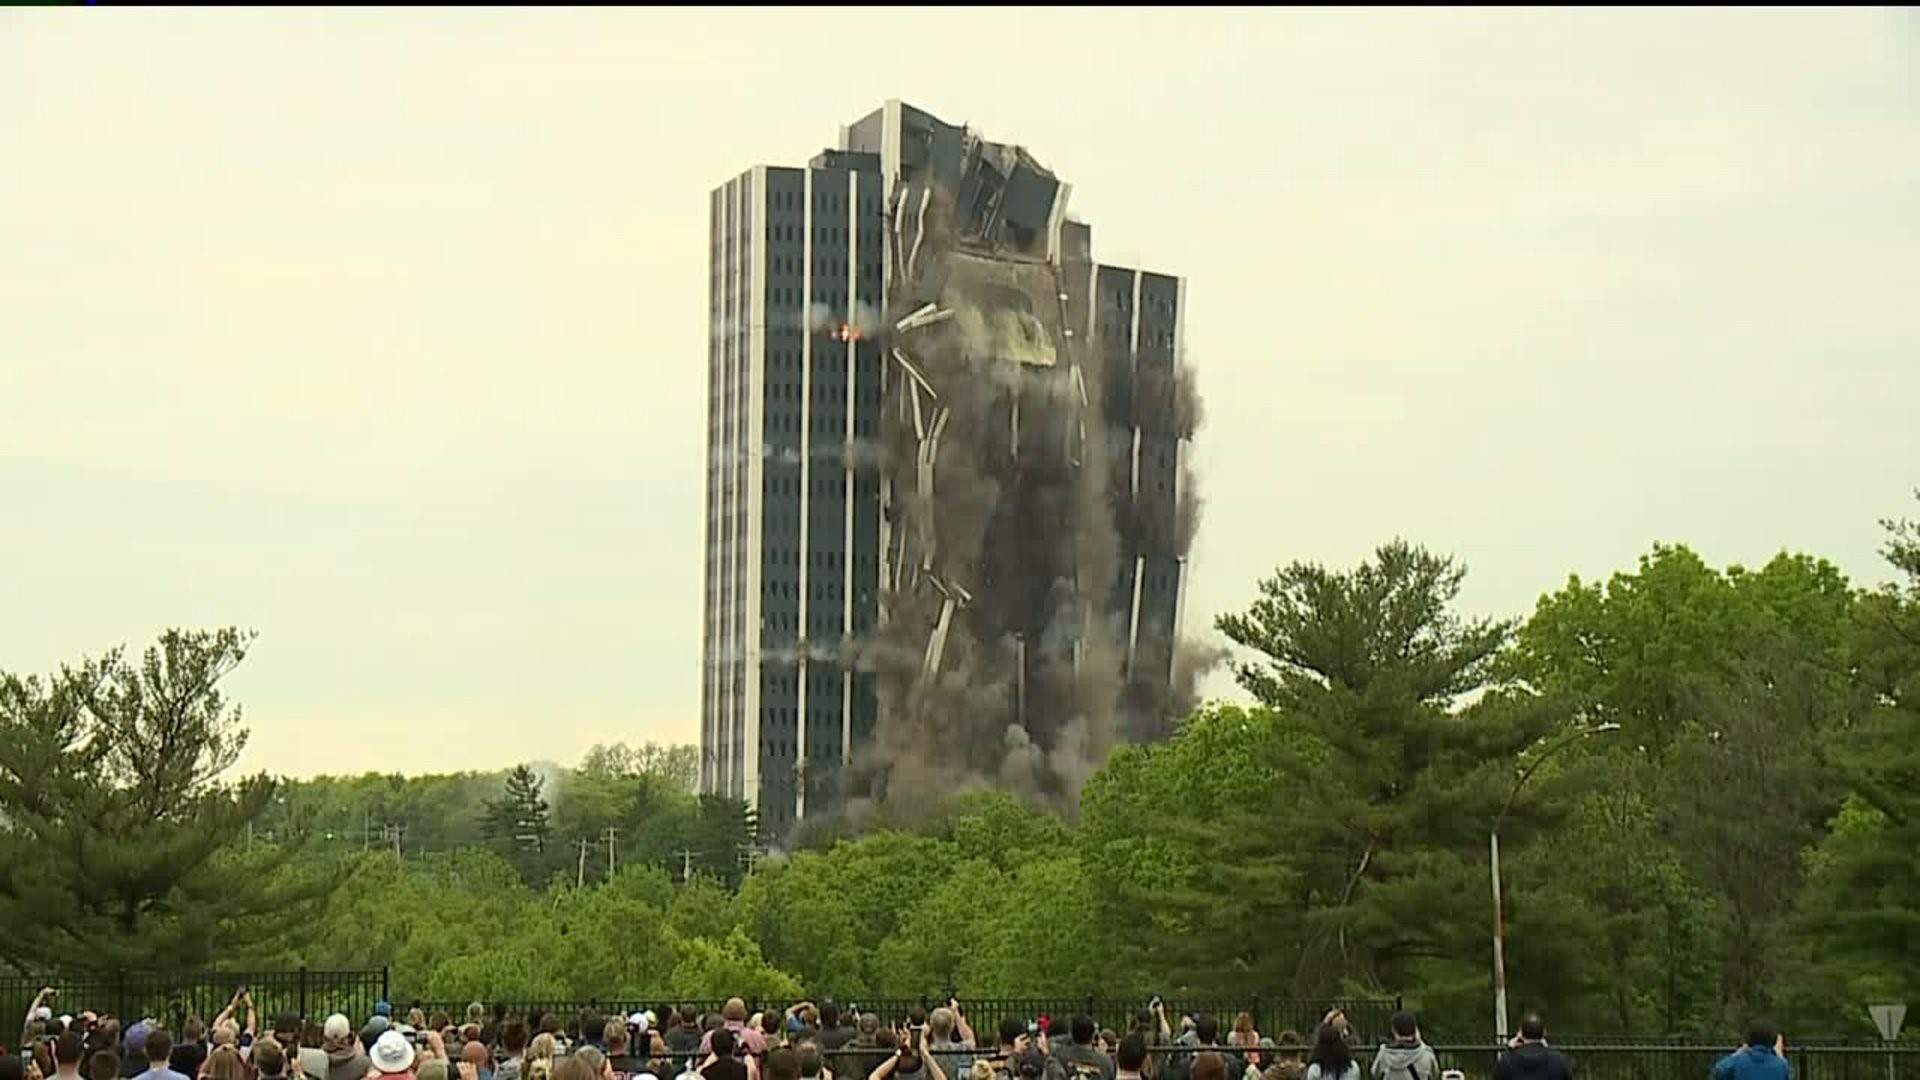 'Wasn't Going to Miss It' - Martin Tower Comes Down in Bethlehem